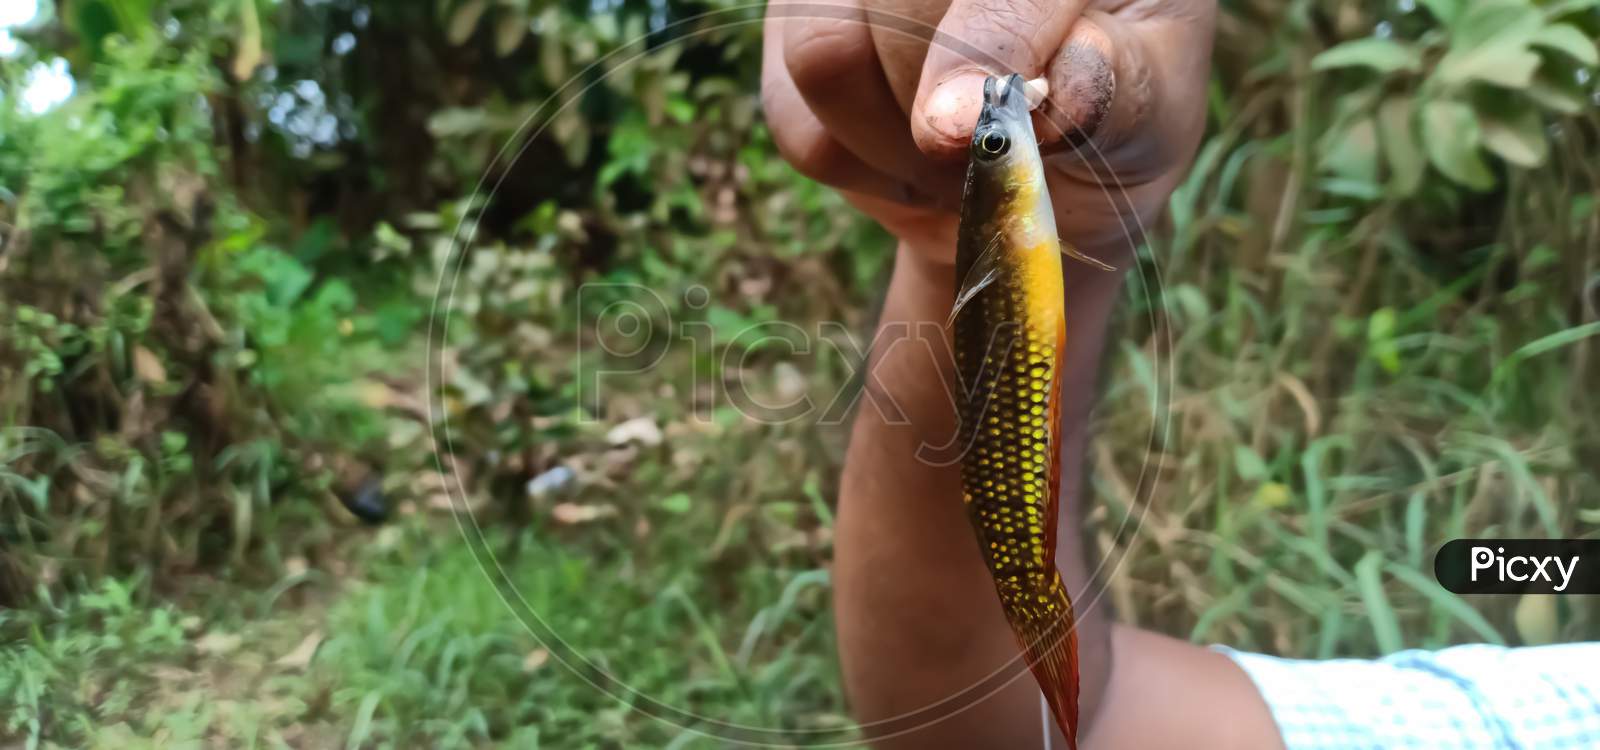 Small Fish Caught On Fishing Tackle